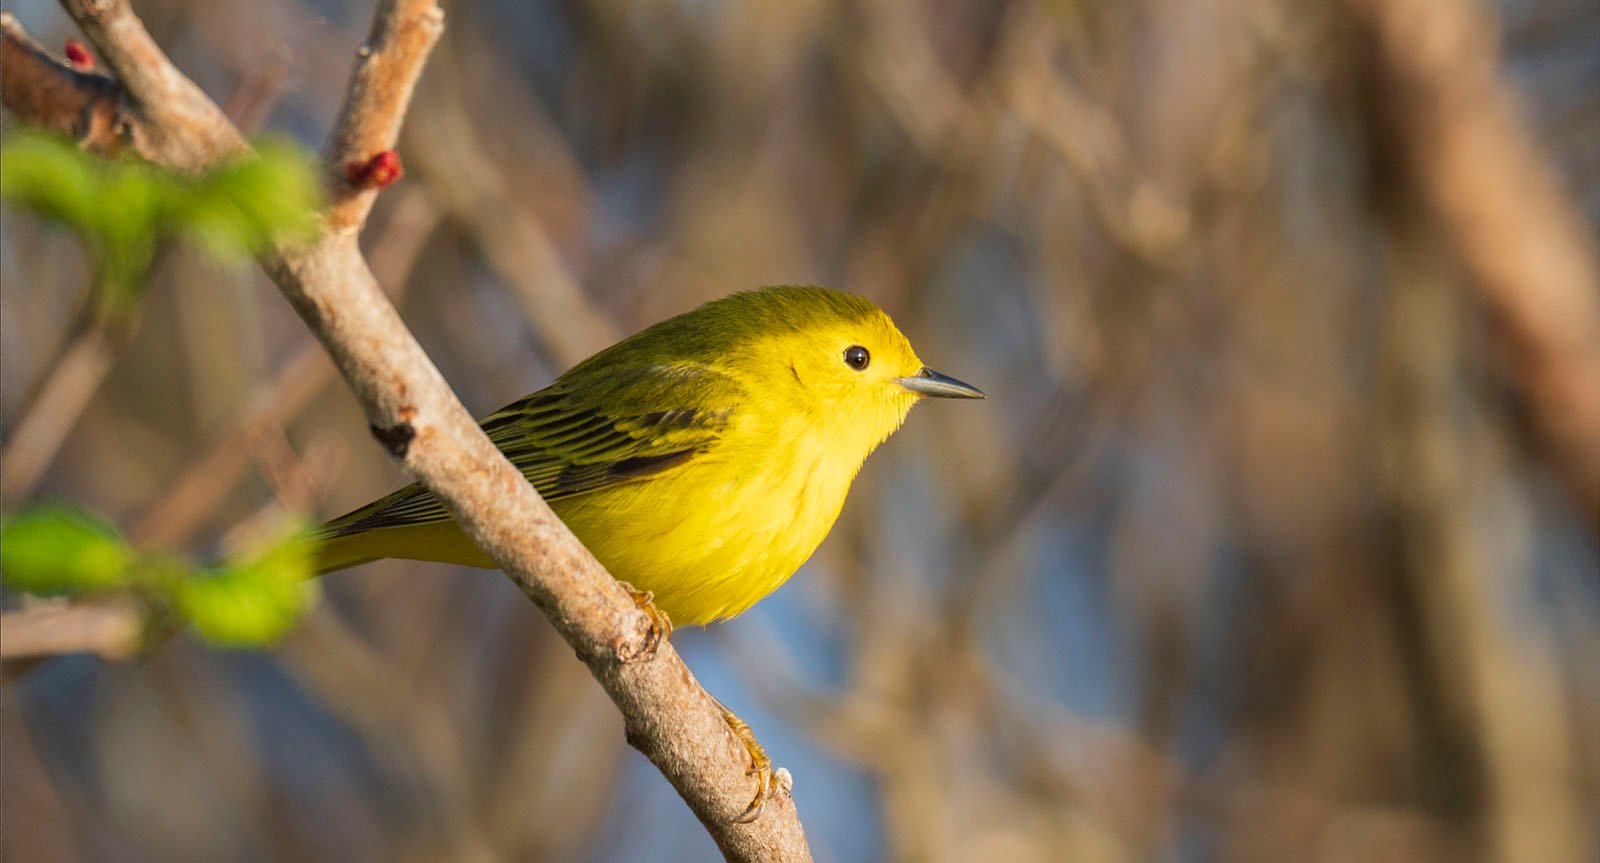 A small, bright yellow bird with olive-green wings perches on a tree branch. The background is blurry, consisting of out-of-focus branches and soft, natural light.